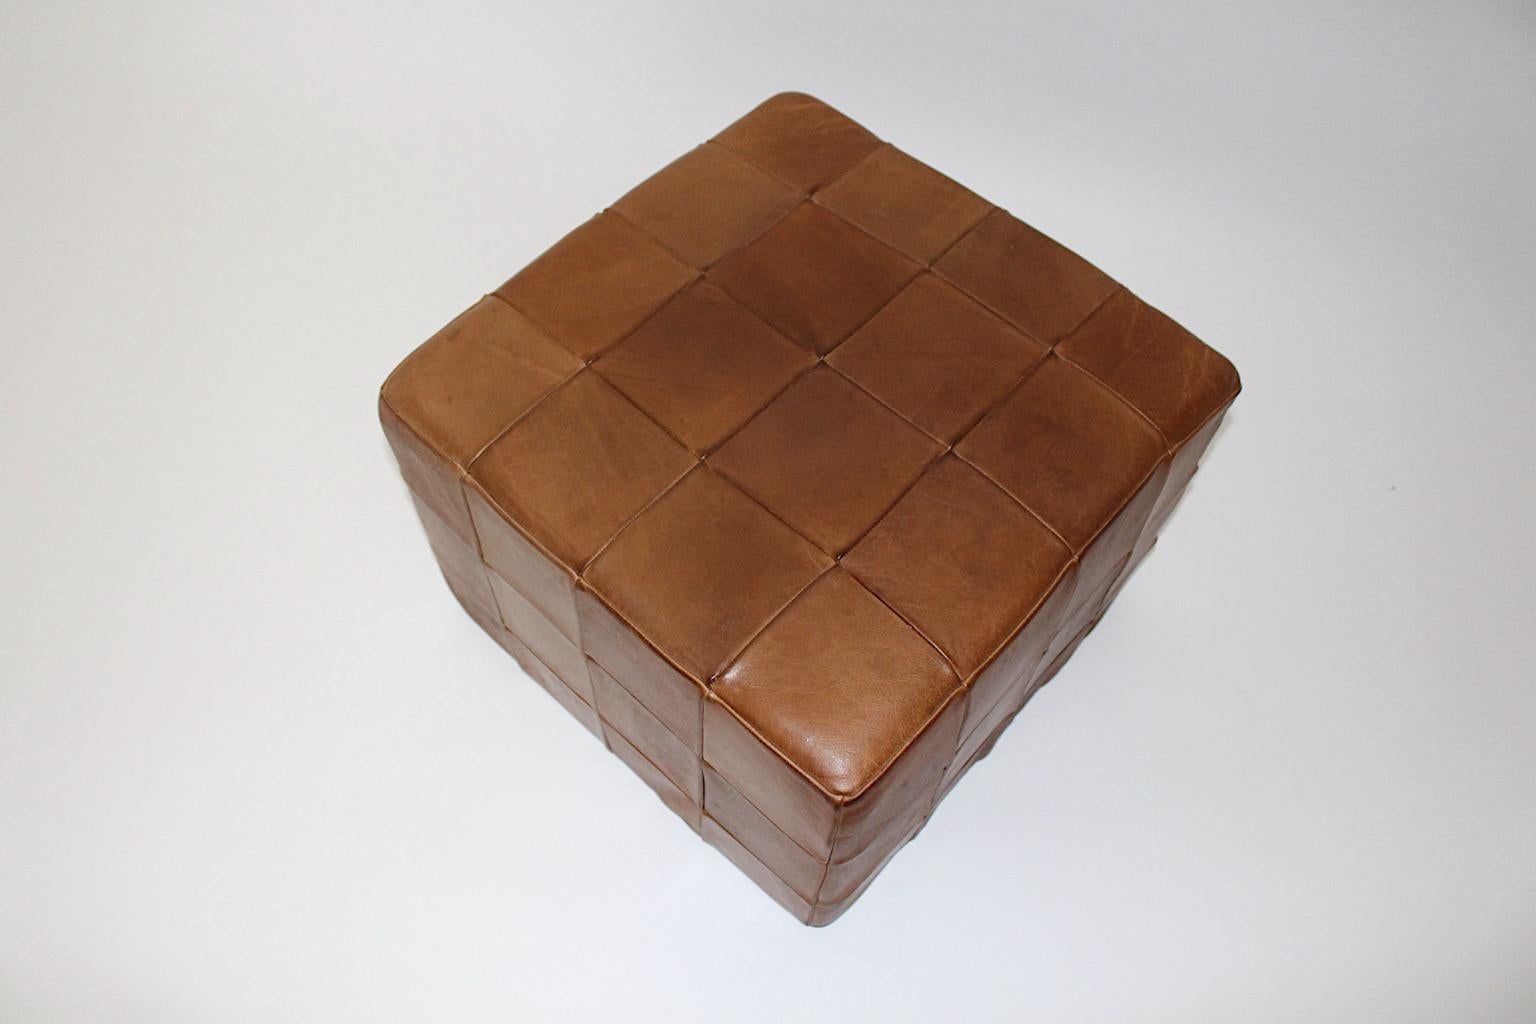 Modernist Organic Vintage Brown Patchwork Leather Cubus Stool DeSede 1970s For Sale 8